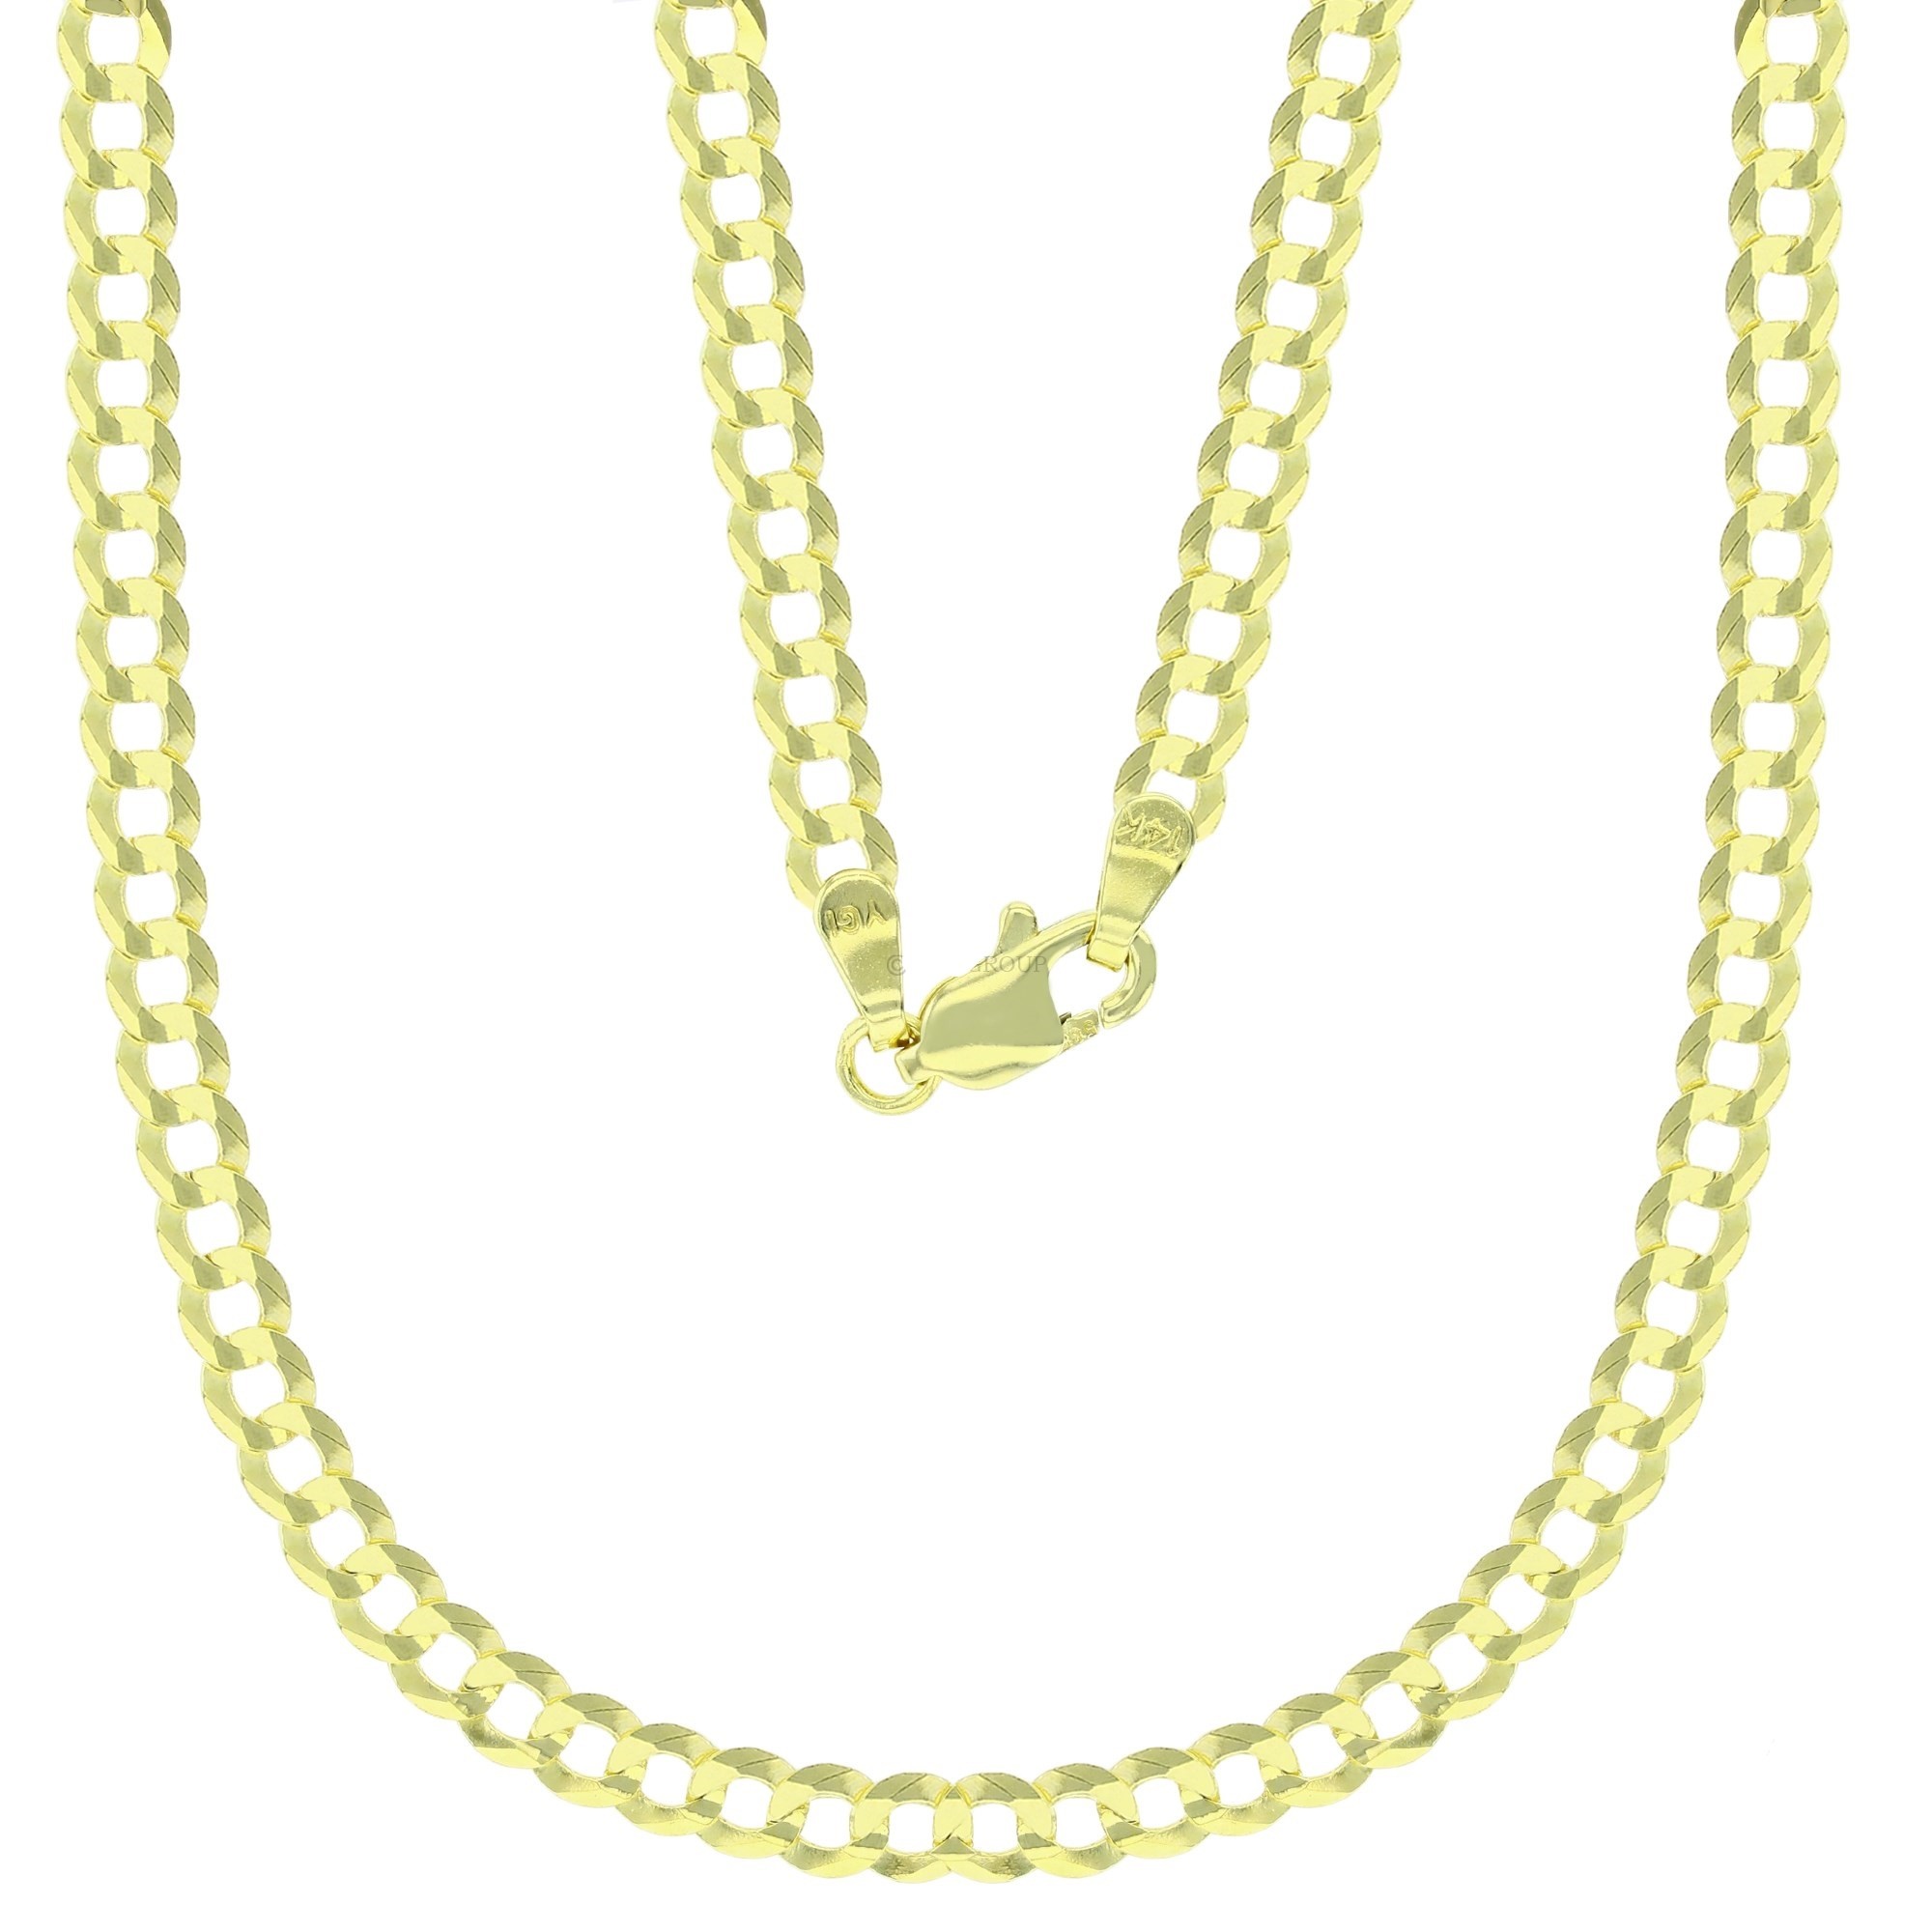 14KT Gold 18" Solid Yellow Cuban Chain 100 Gauge 3.80MM